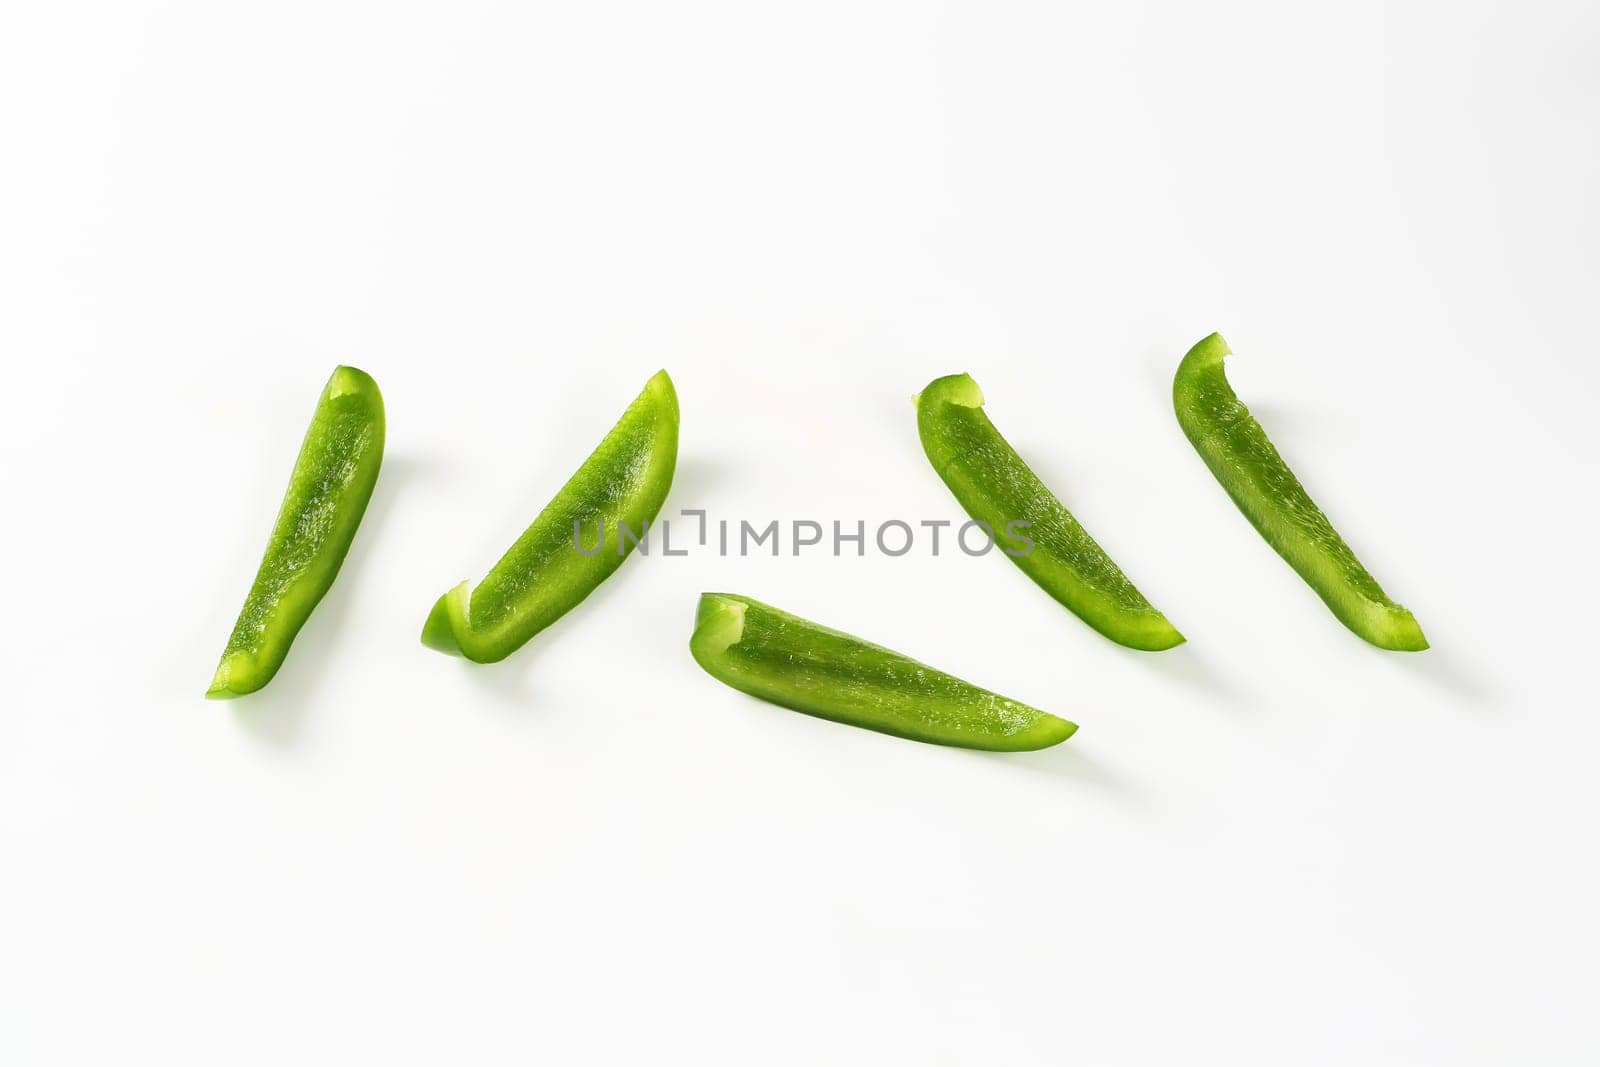 Thin slices of fresh green pepper on white background